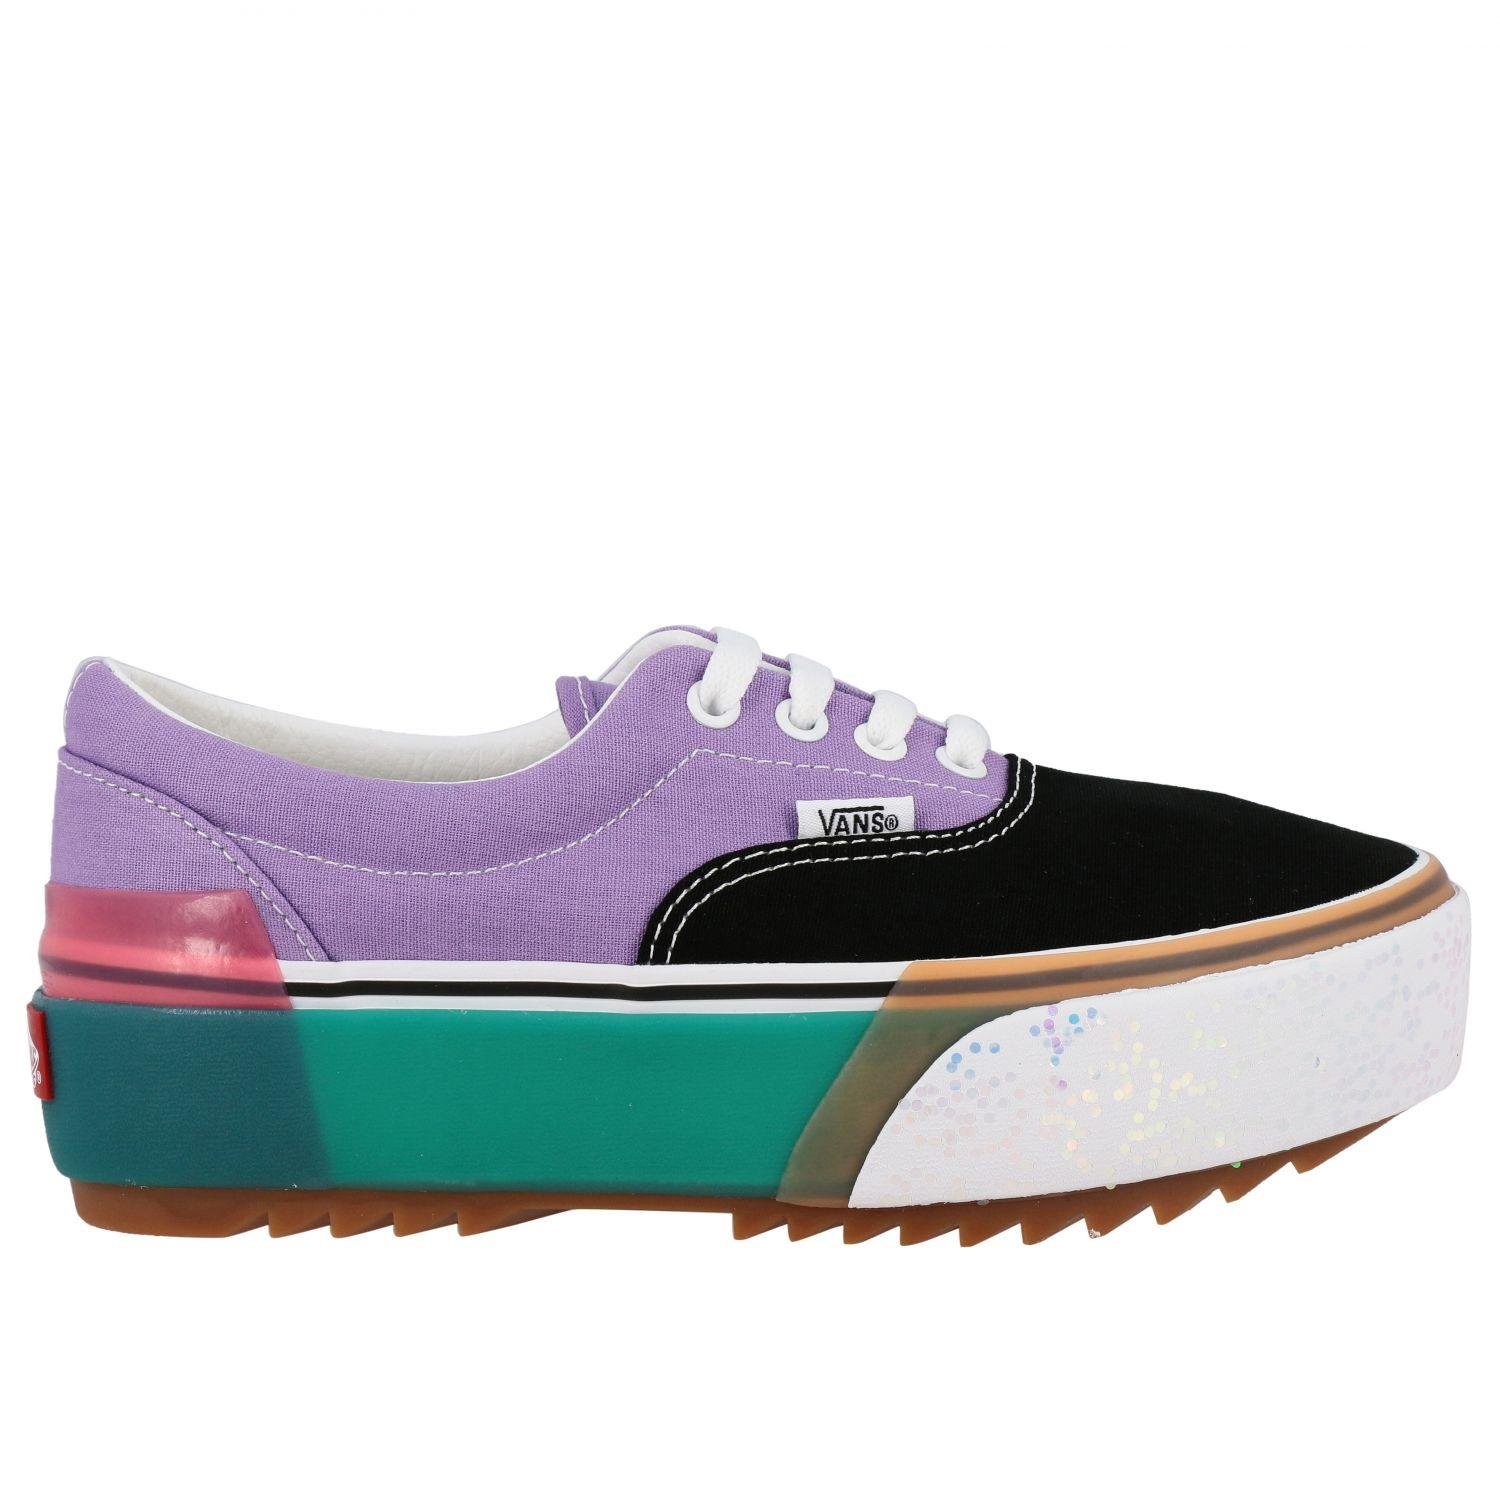 Vans Leather Era Stacked Shoes (trainers) in Violet (Purple) - Lyst